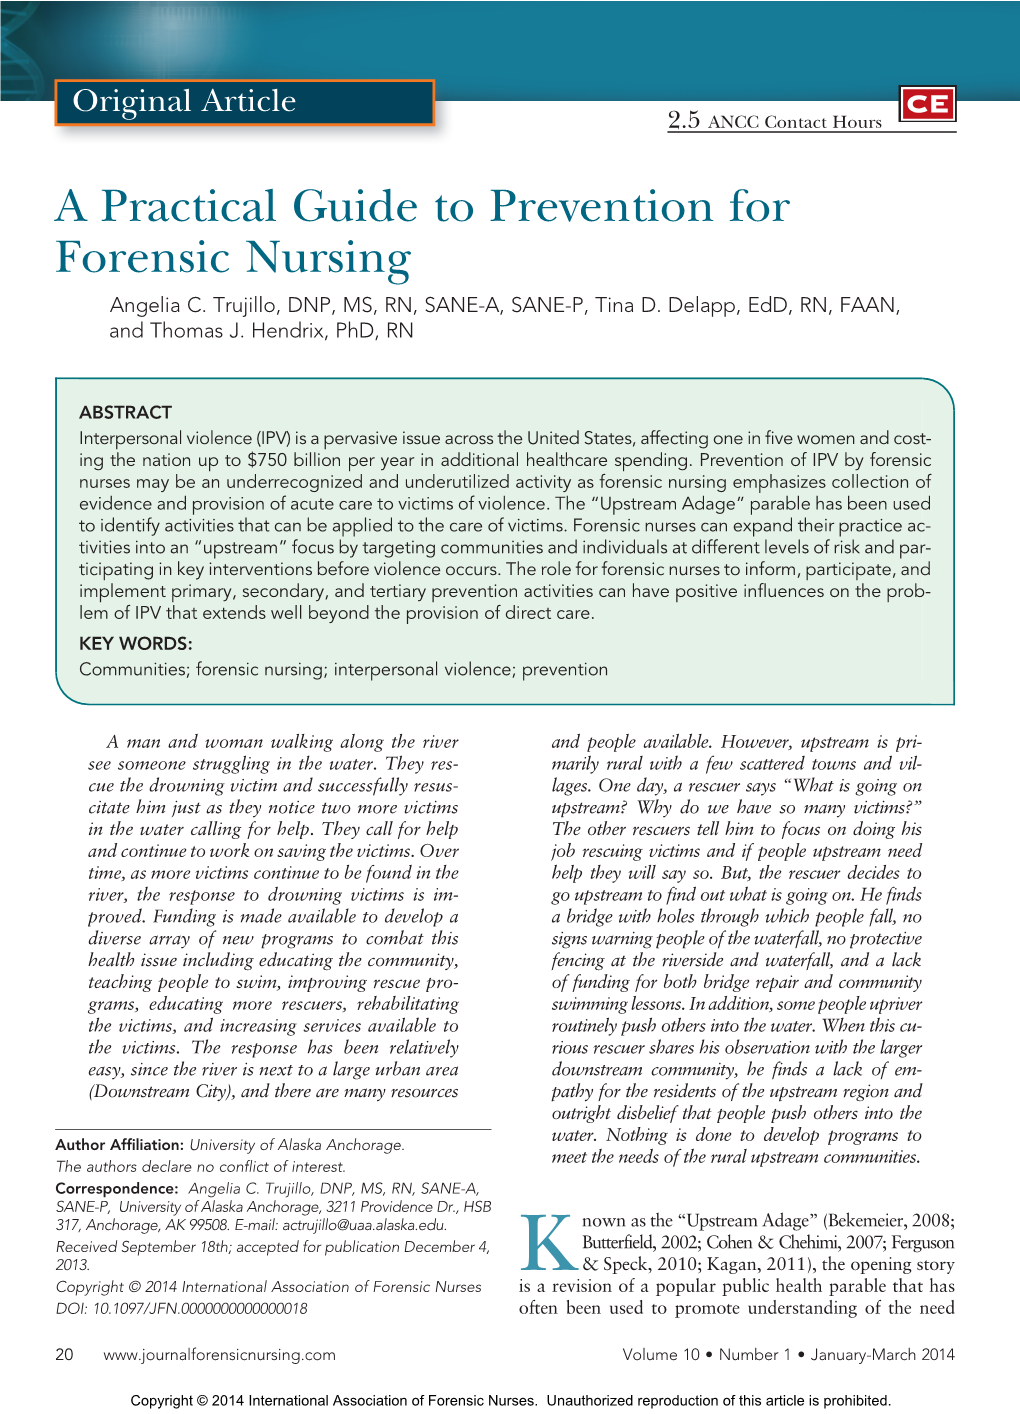 A Practical Guide to Prevention for Forensic Nursing Angelia C